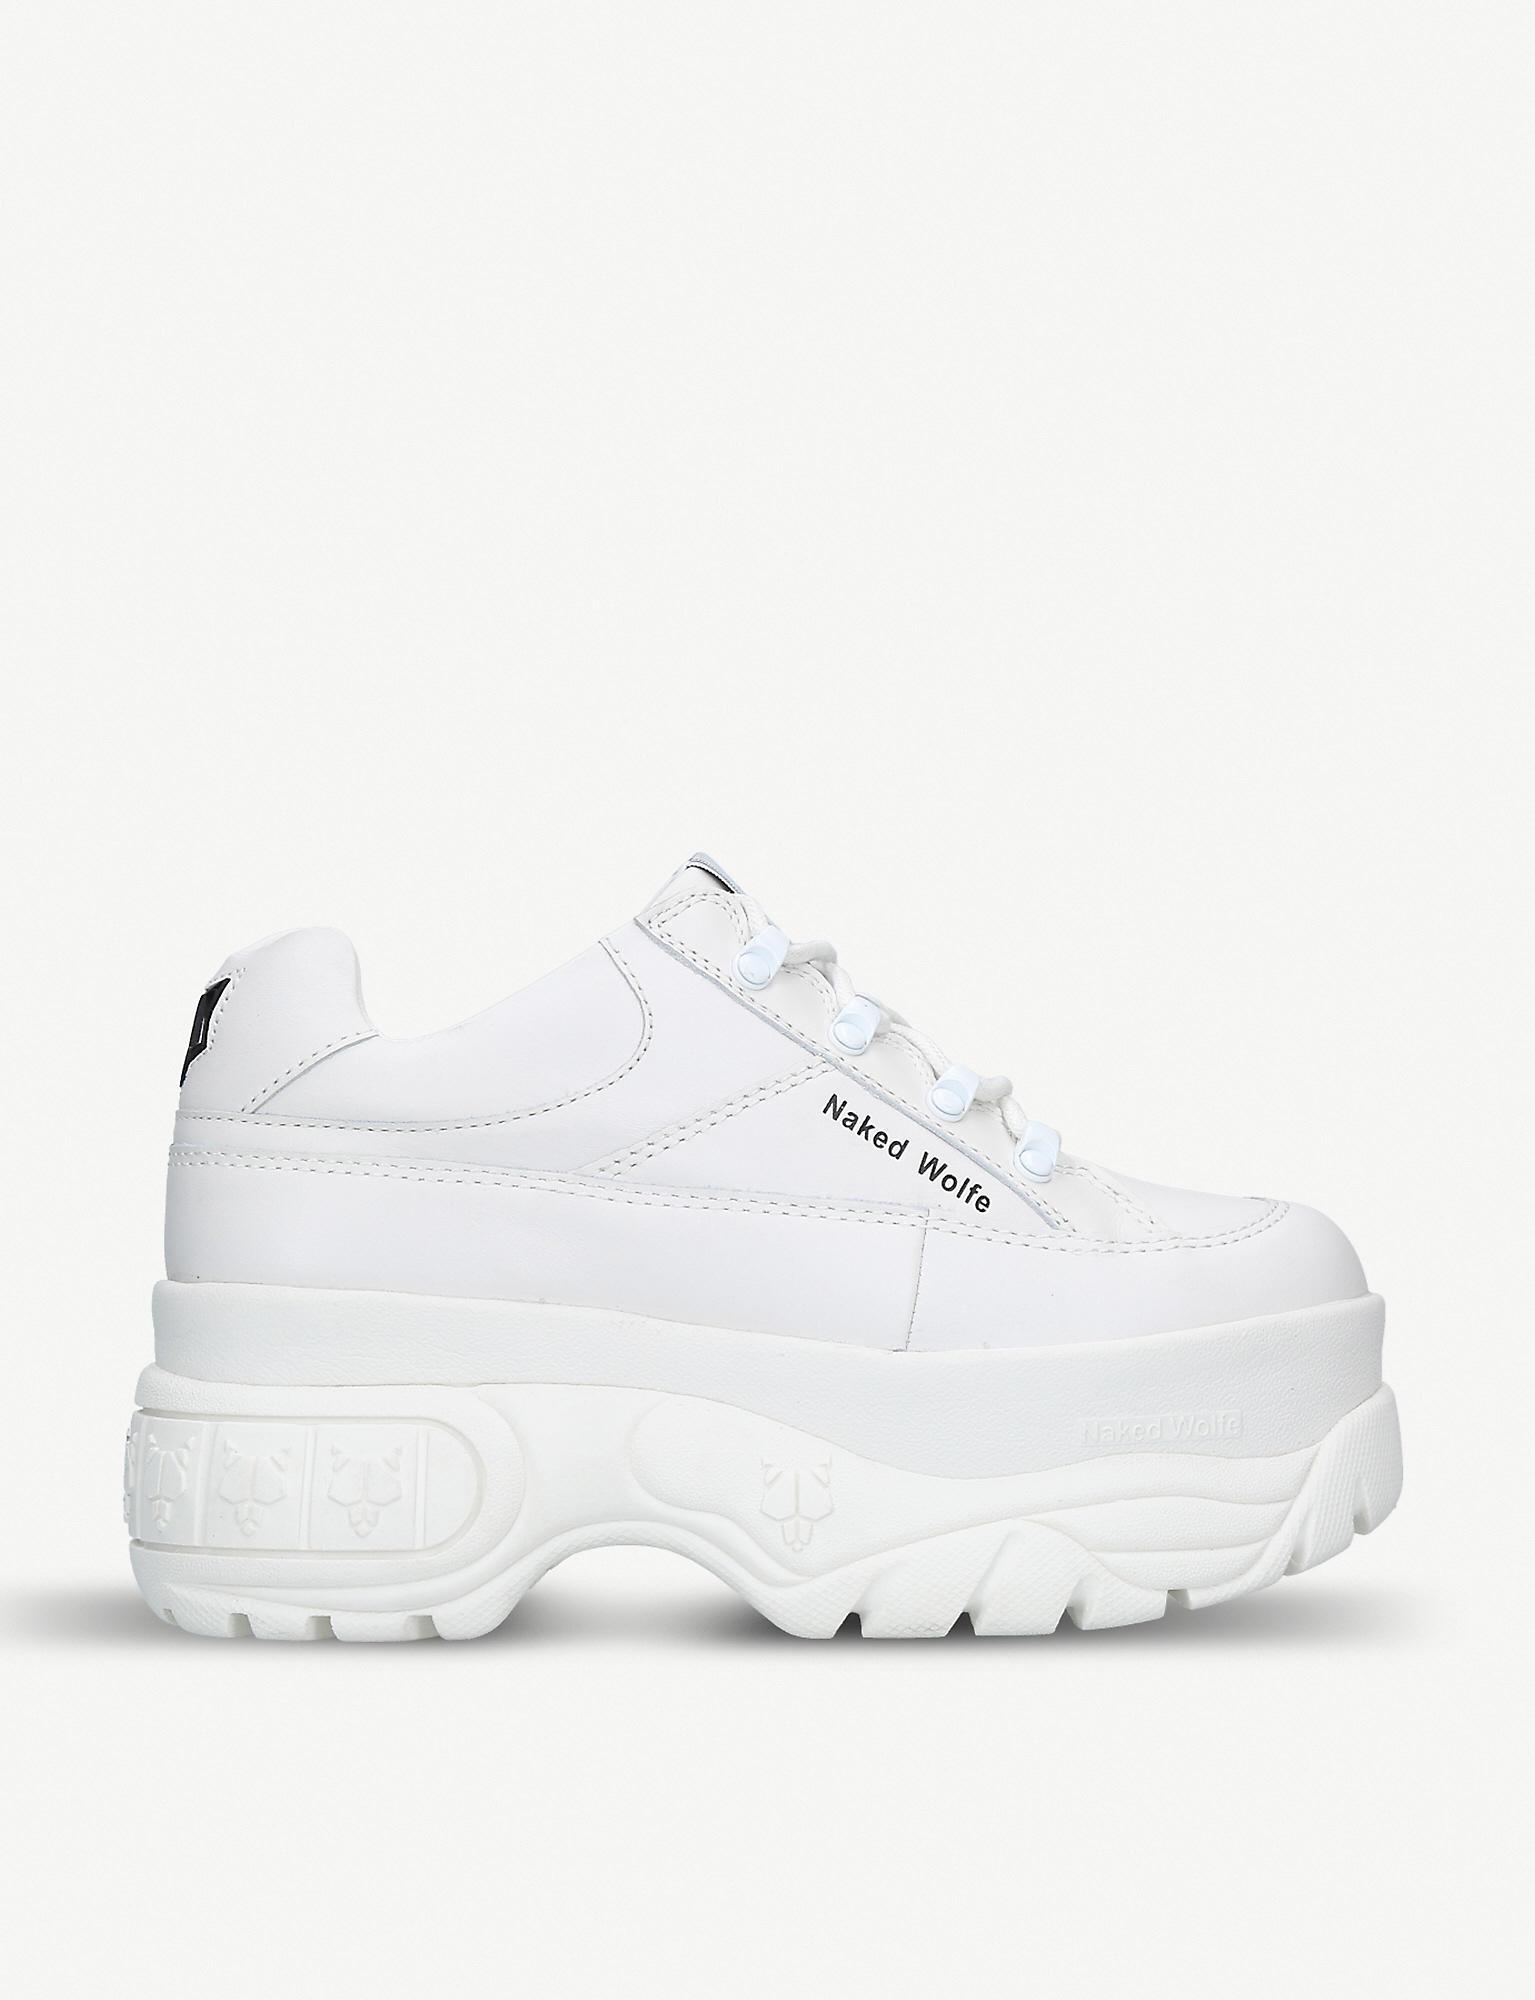 Naked Wolfe Sporty Leather Platform Trainers in White | Lyst